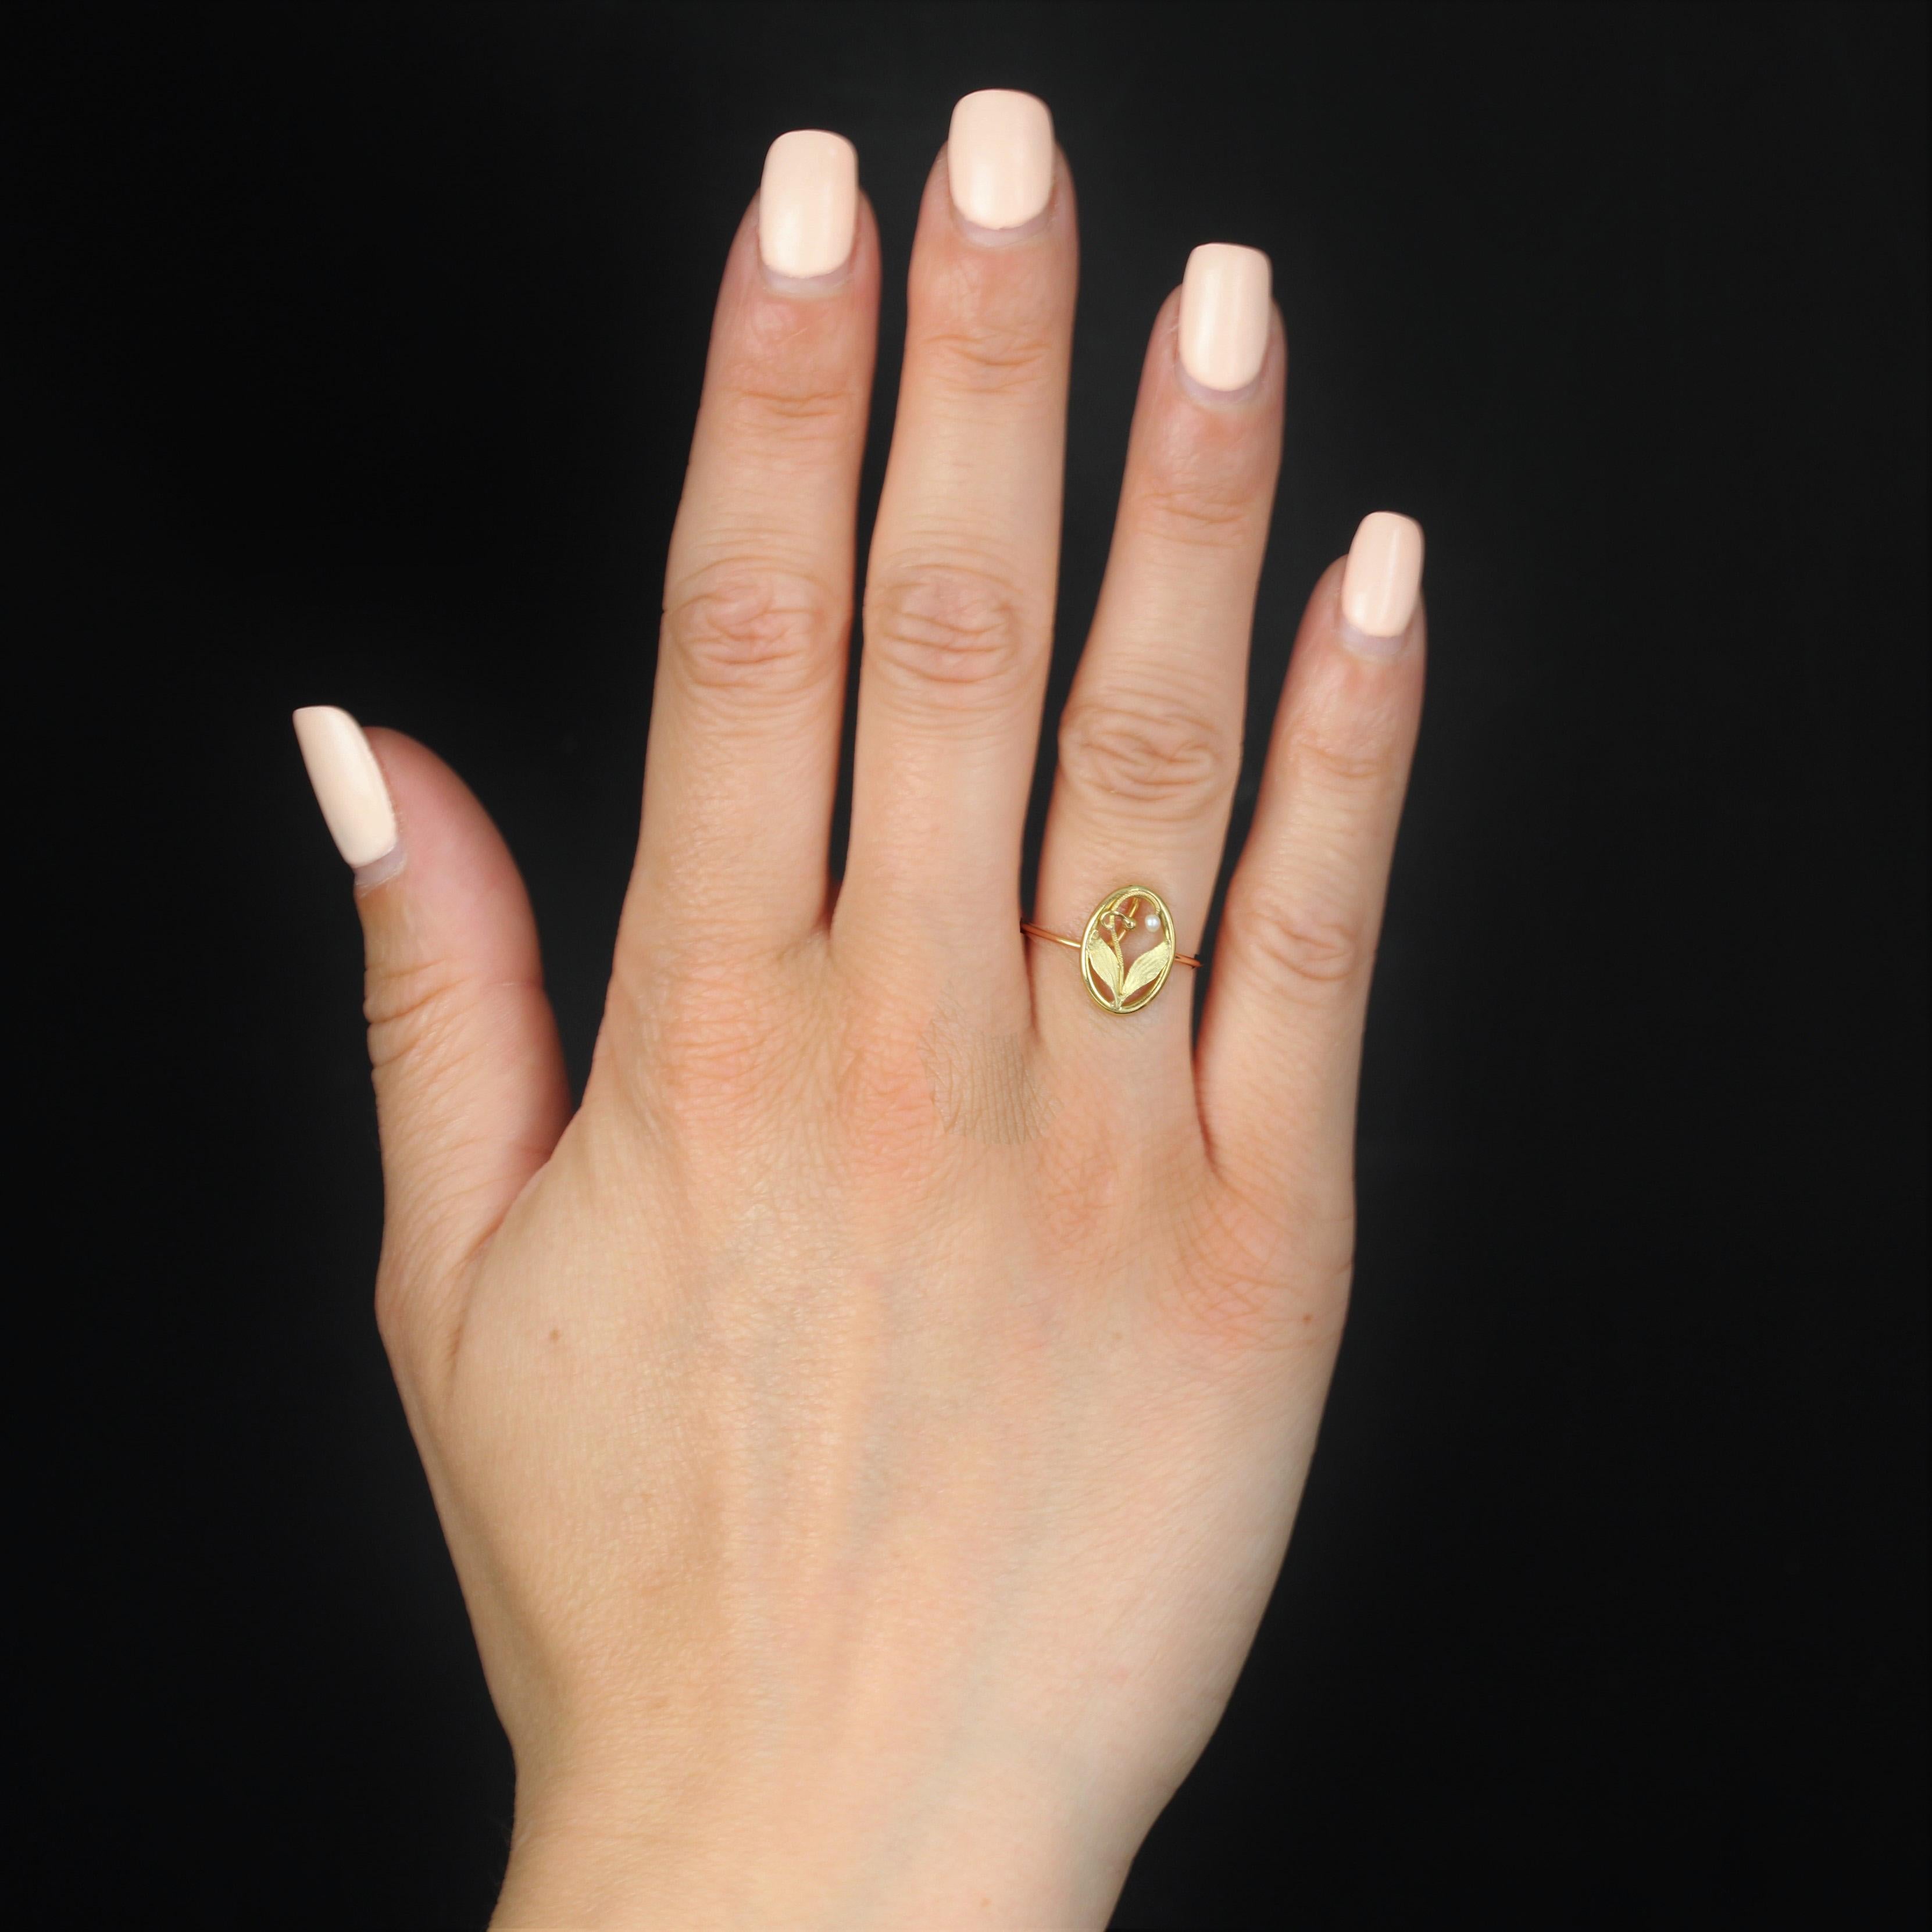 Ring in 18 karat yellow and rose gold.
Charming antique ring featuring a gold wire forming an openwork oval with a leaf motif, a gold pearl and a small fine pearl in the center. A ring of fine rose gold wire holds it together.
Height : 12.5 mm